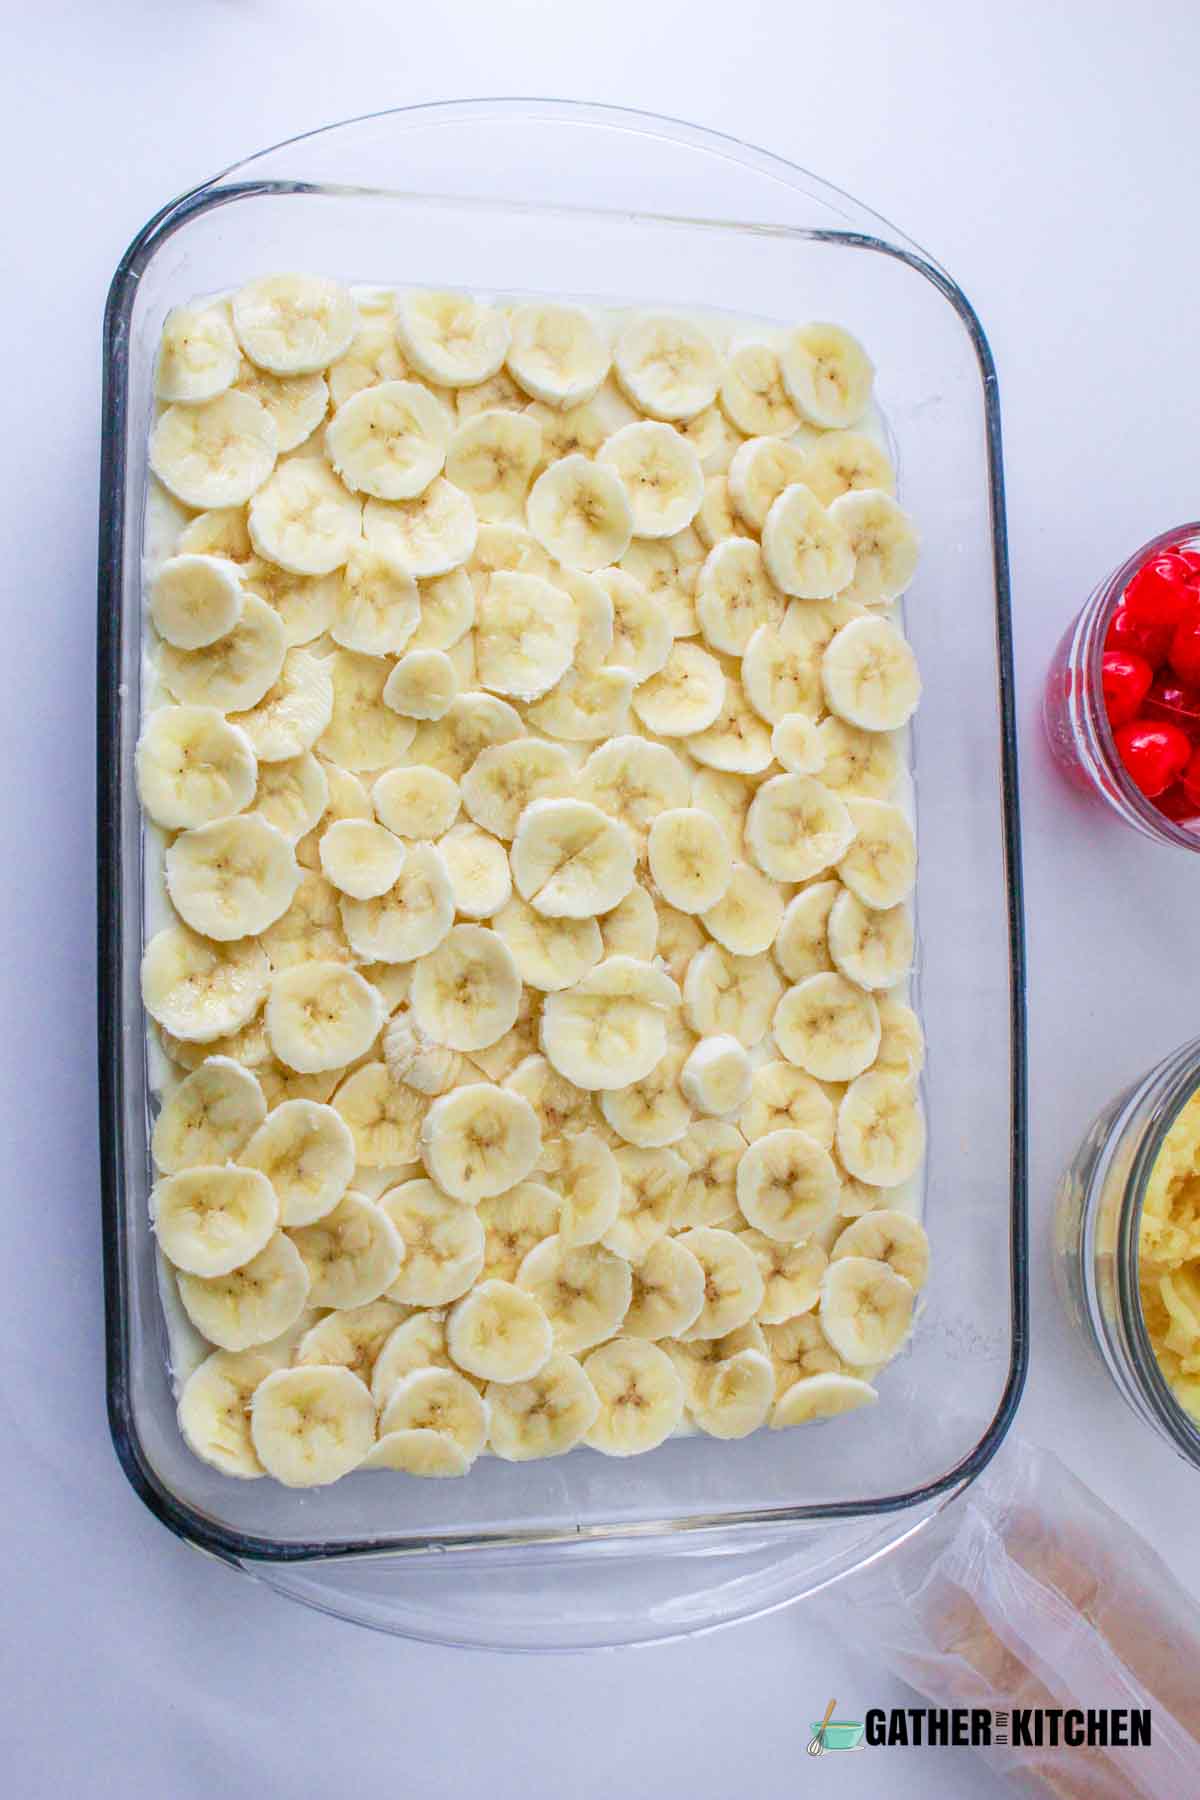 Sliced bananas over the cream cheese layer.